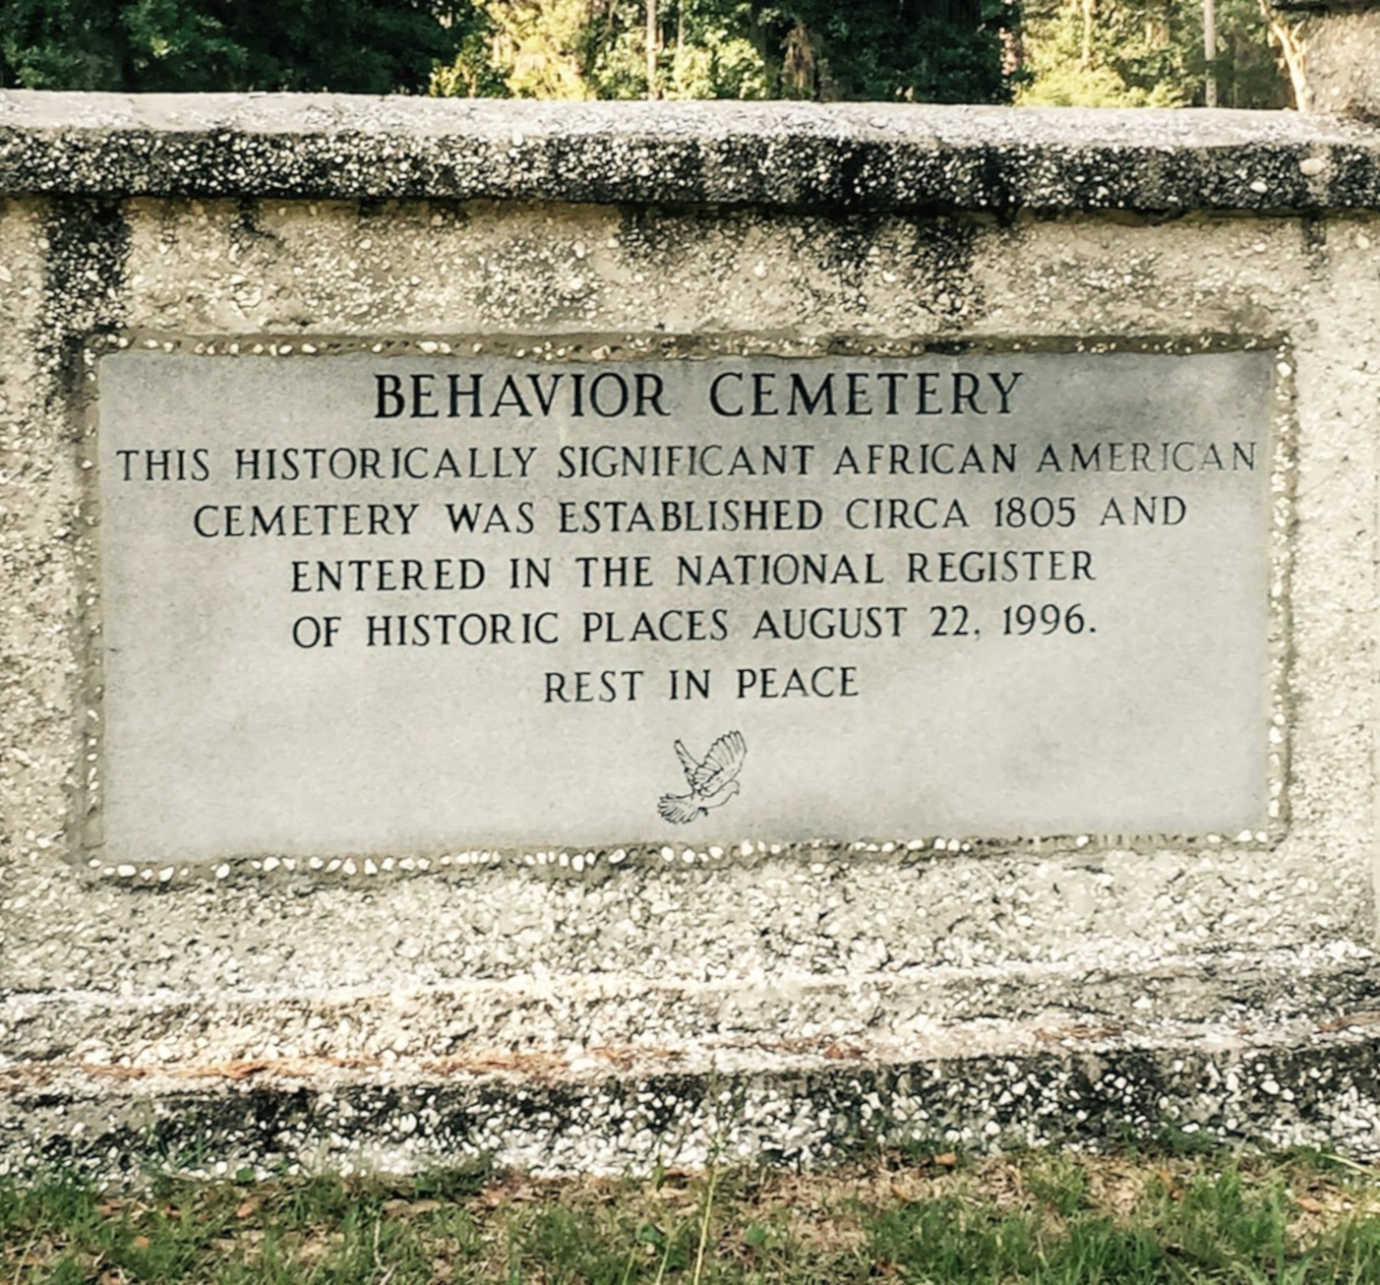 Marker noting the historical significance of Behavior Cemetery on Sapelo Island, which was established by a for enslaved rice plantation workers in 1805. Image courtesy of Gullah Voices.